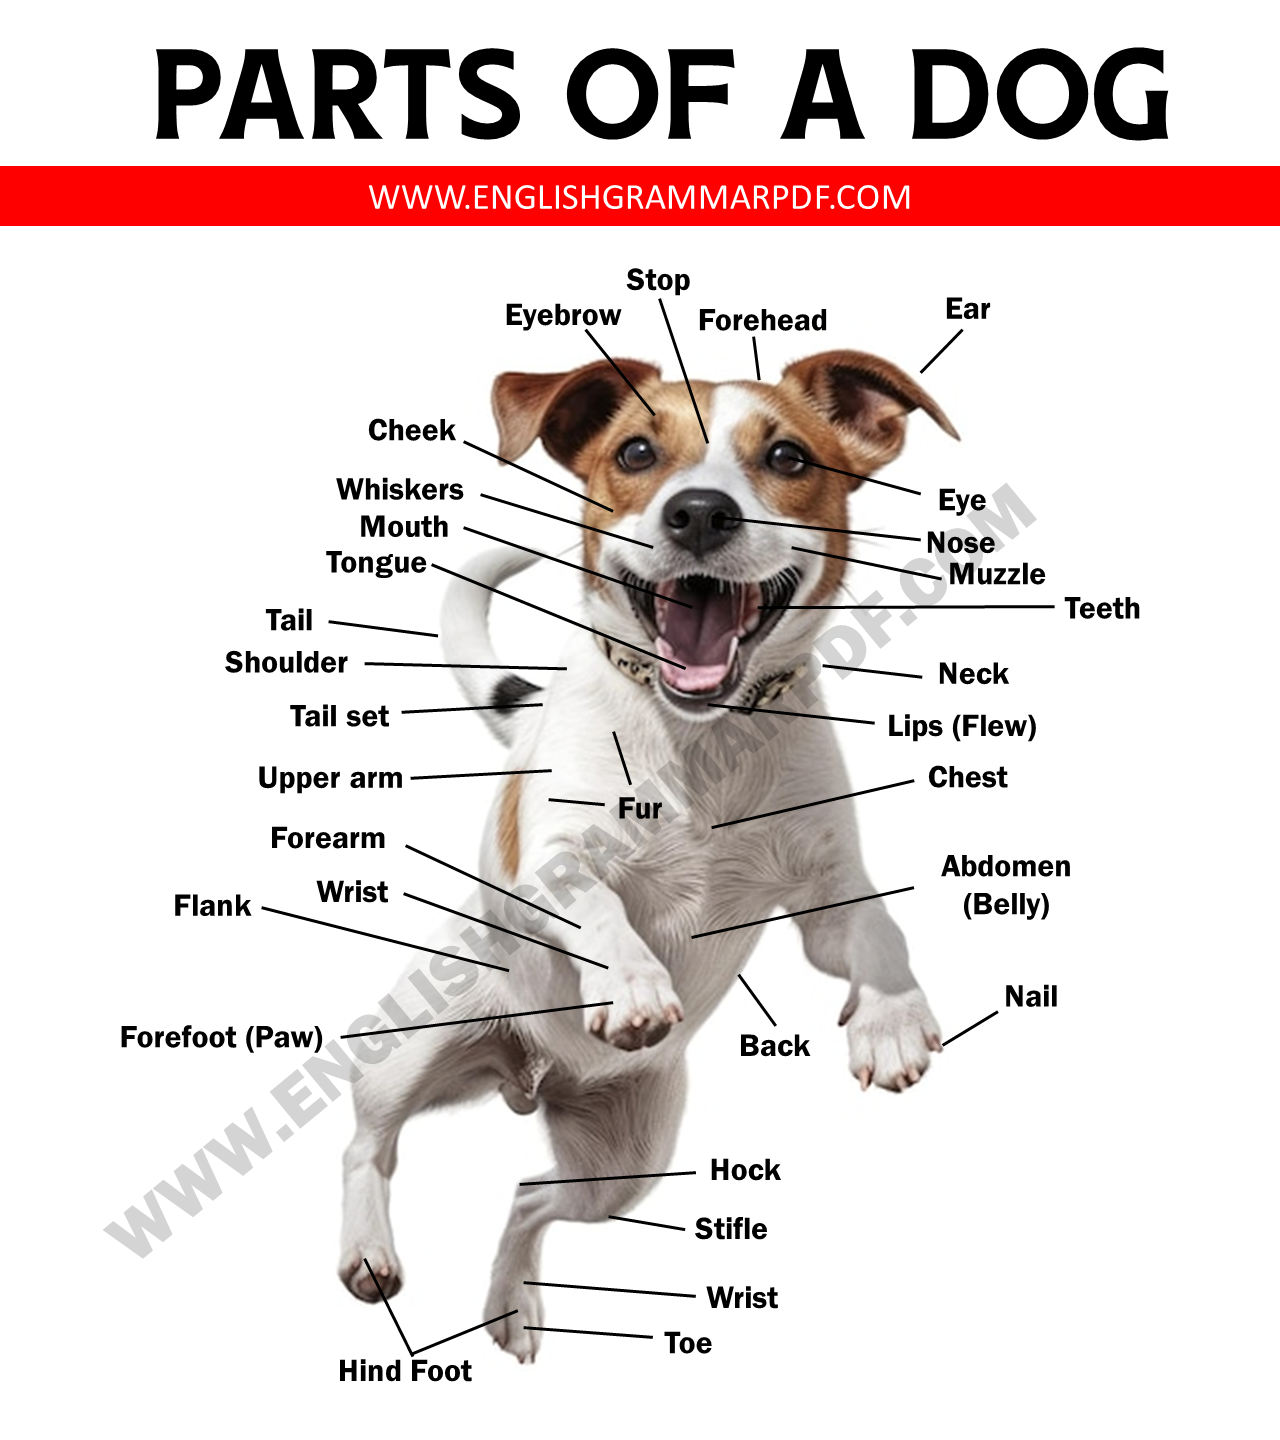 Parts of A Dog